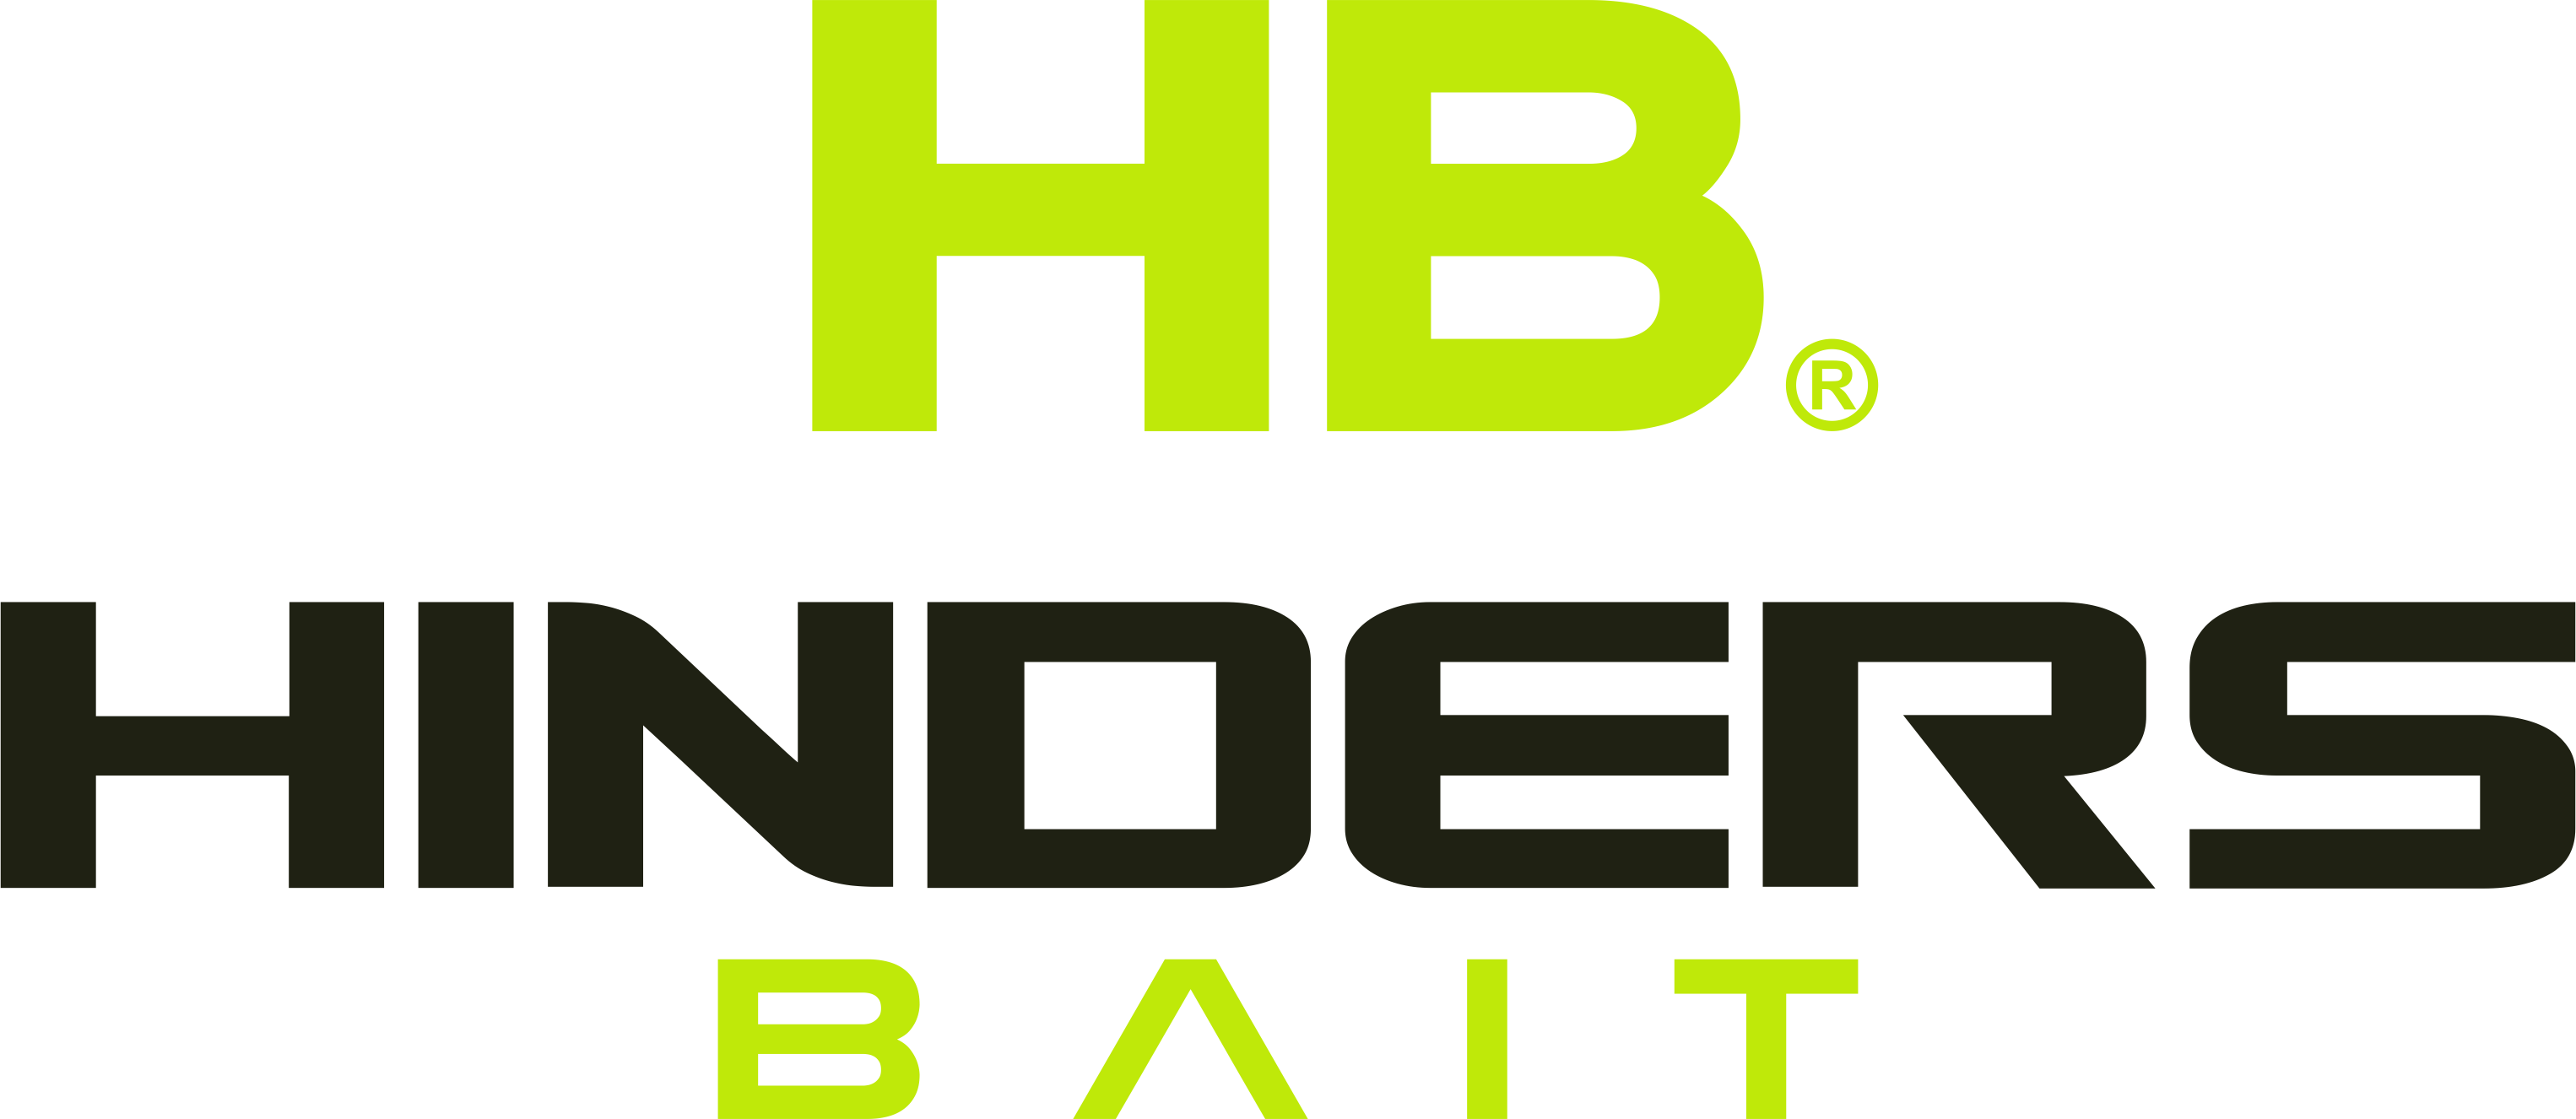 Particle Baits from Hinders Bait - Hinders Baits